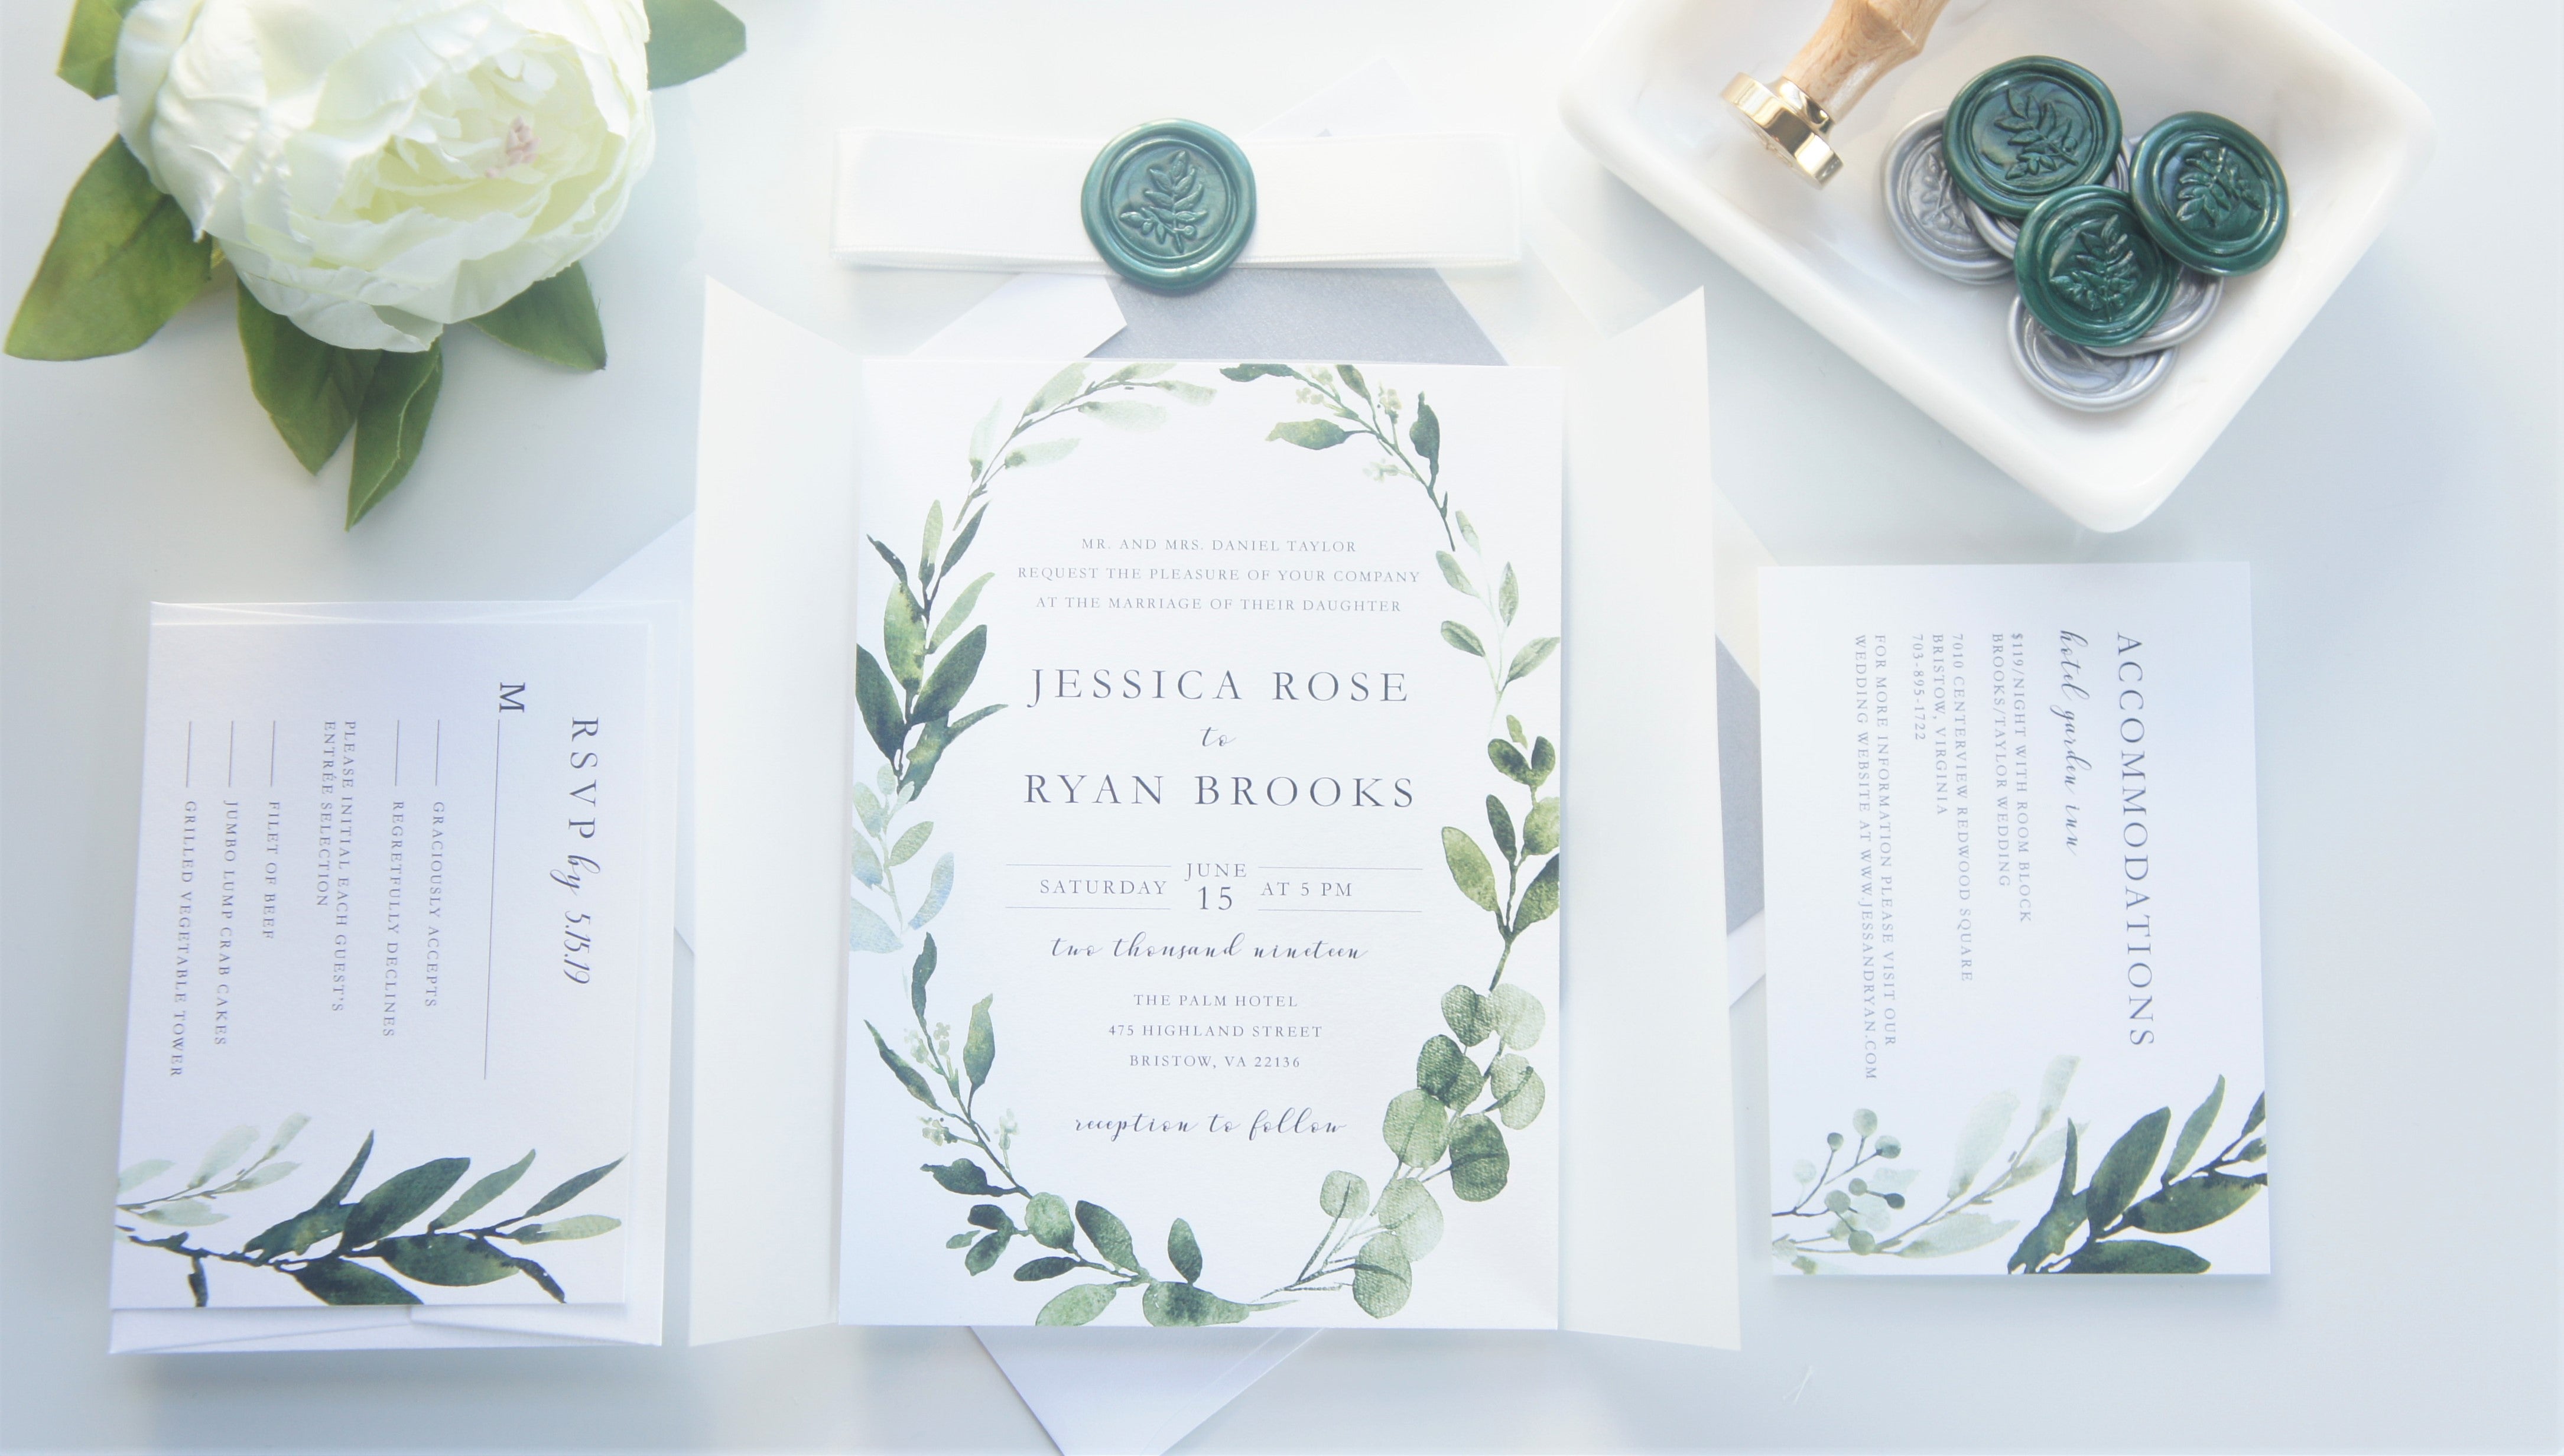 Green and Silver Vellum and Wax Seal Wedding Invitation - SAMPLE